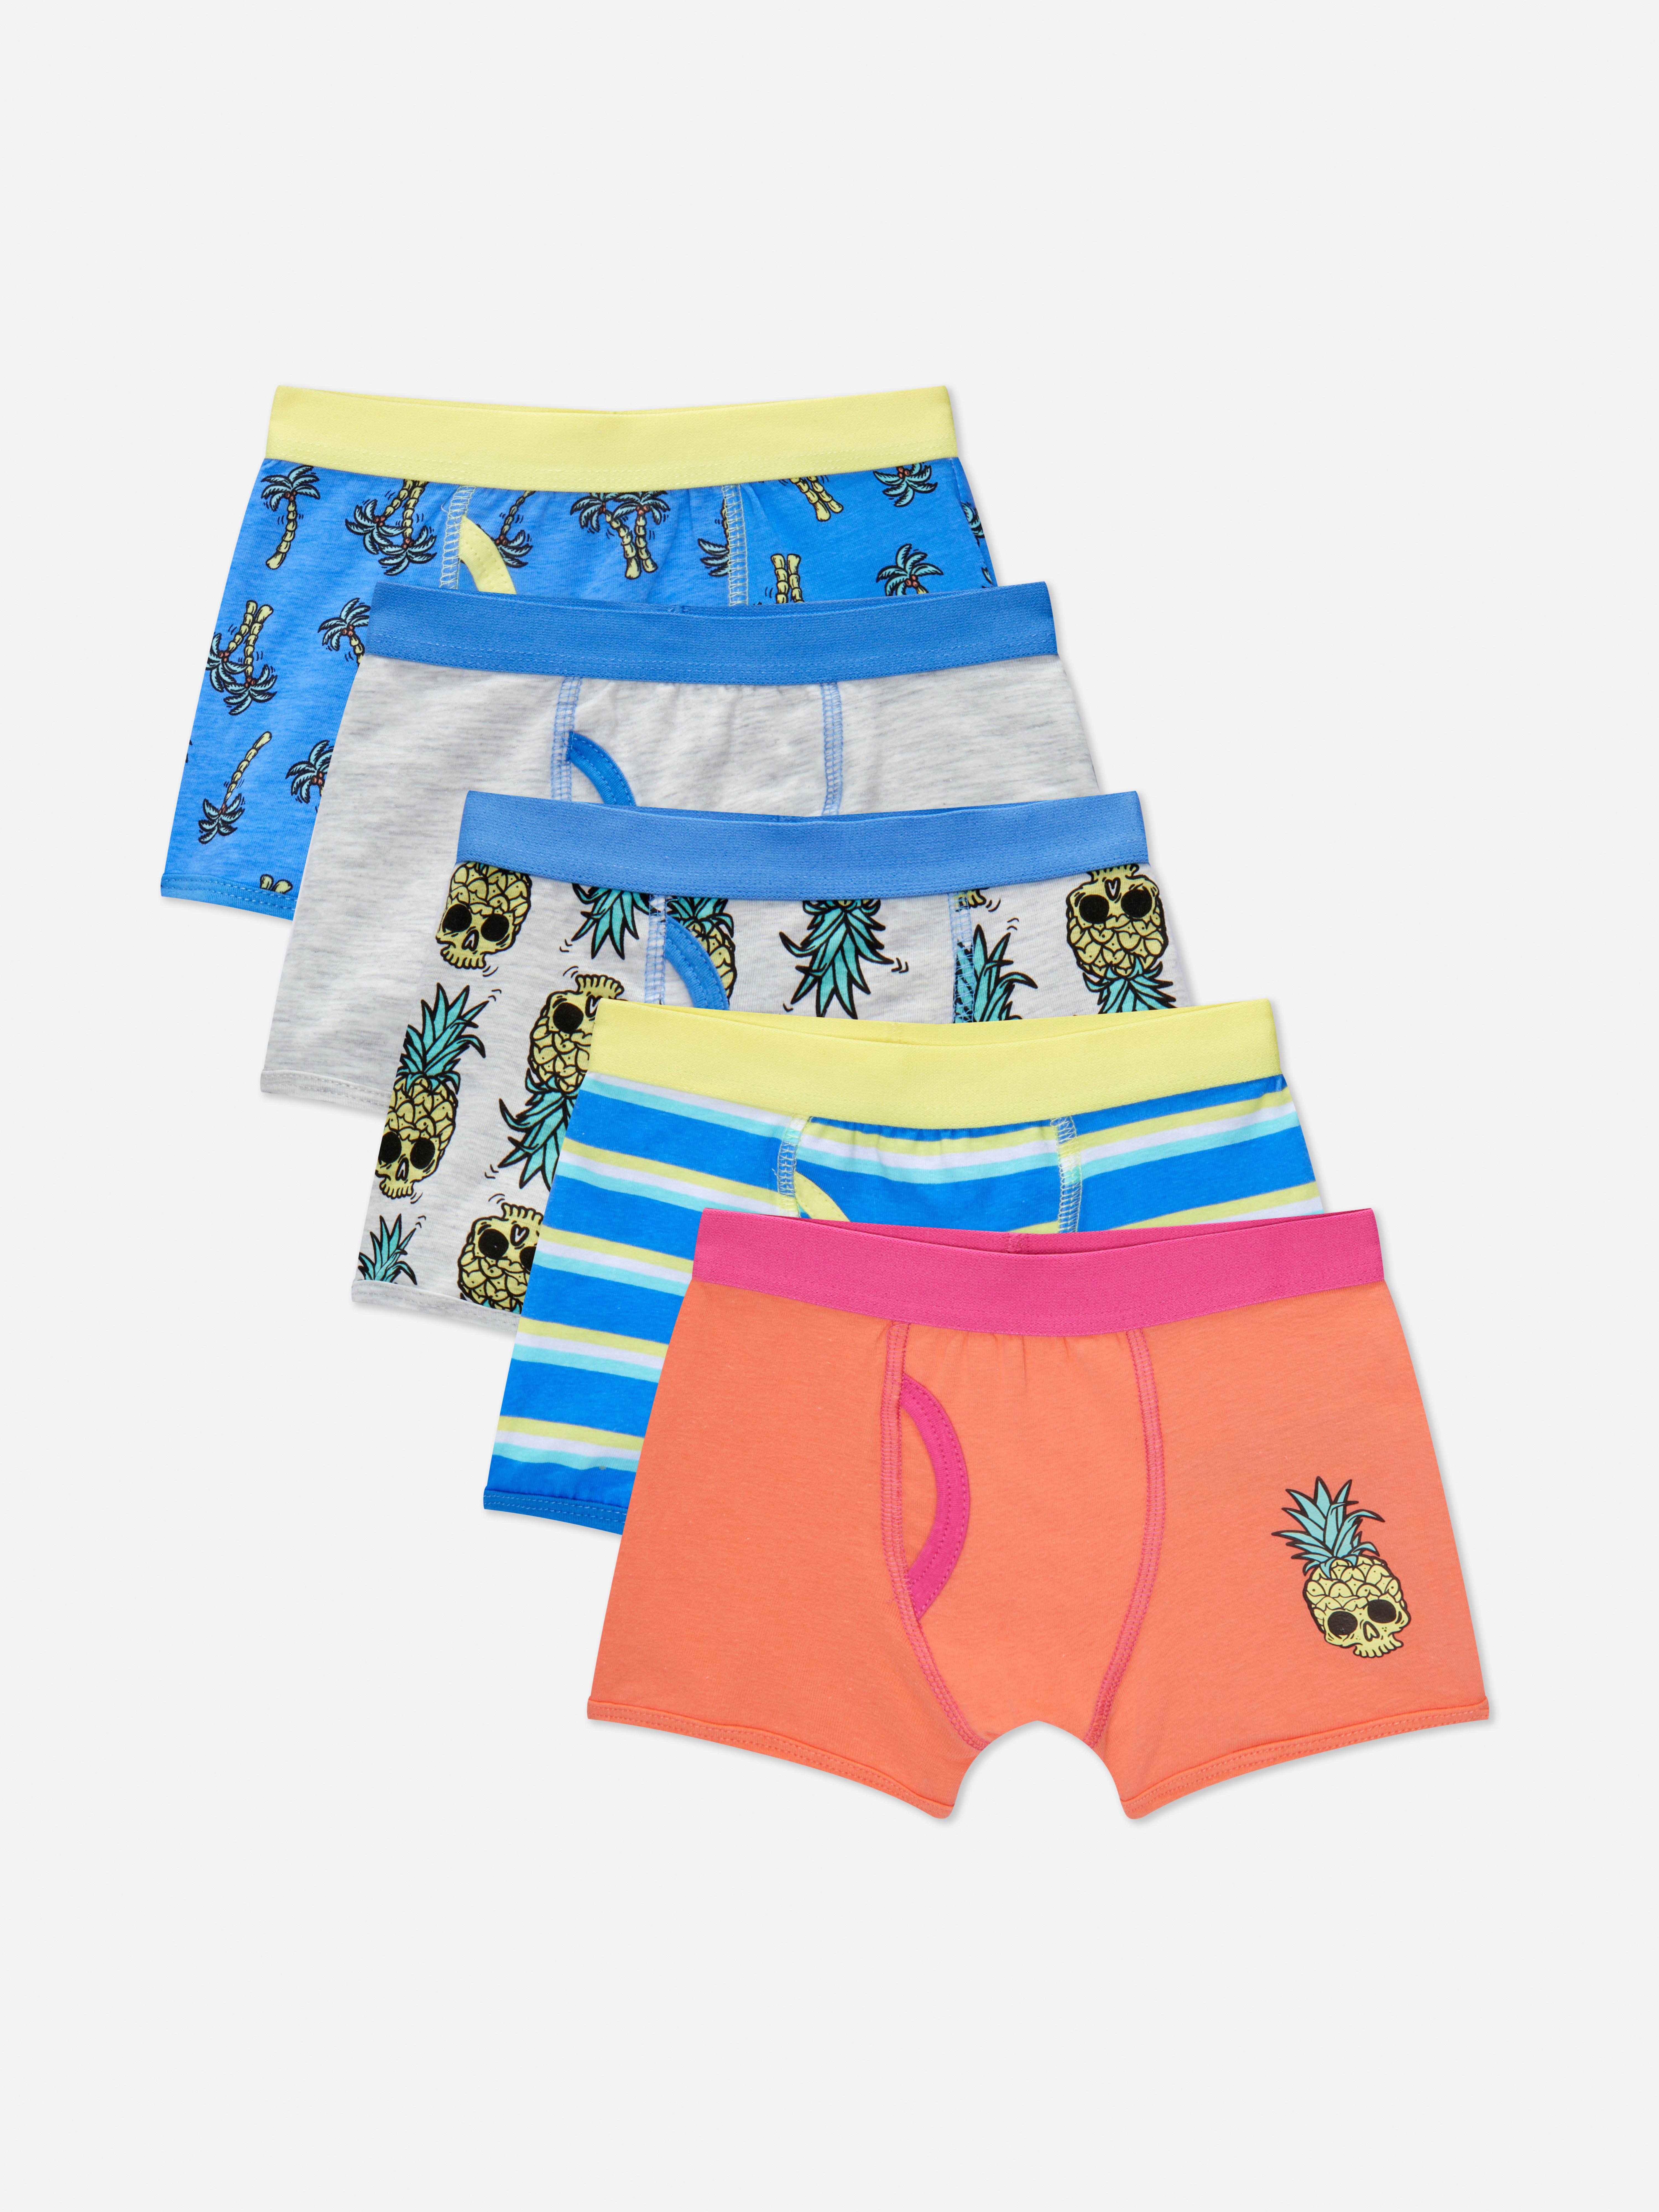 Buy Boxers PRIMARK, Nice childrens clothing from KidsMall - 109534